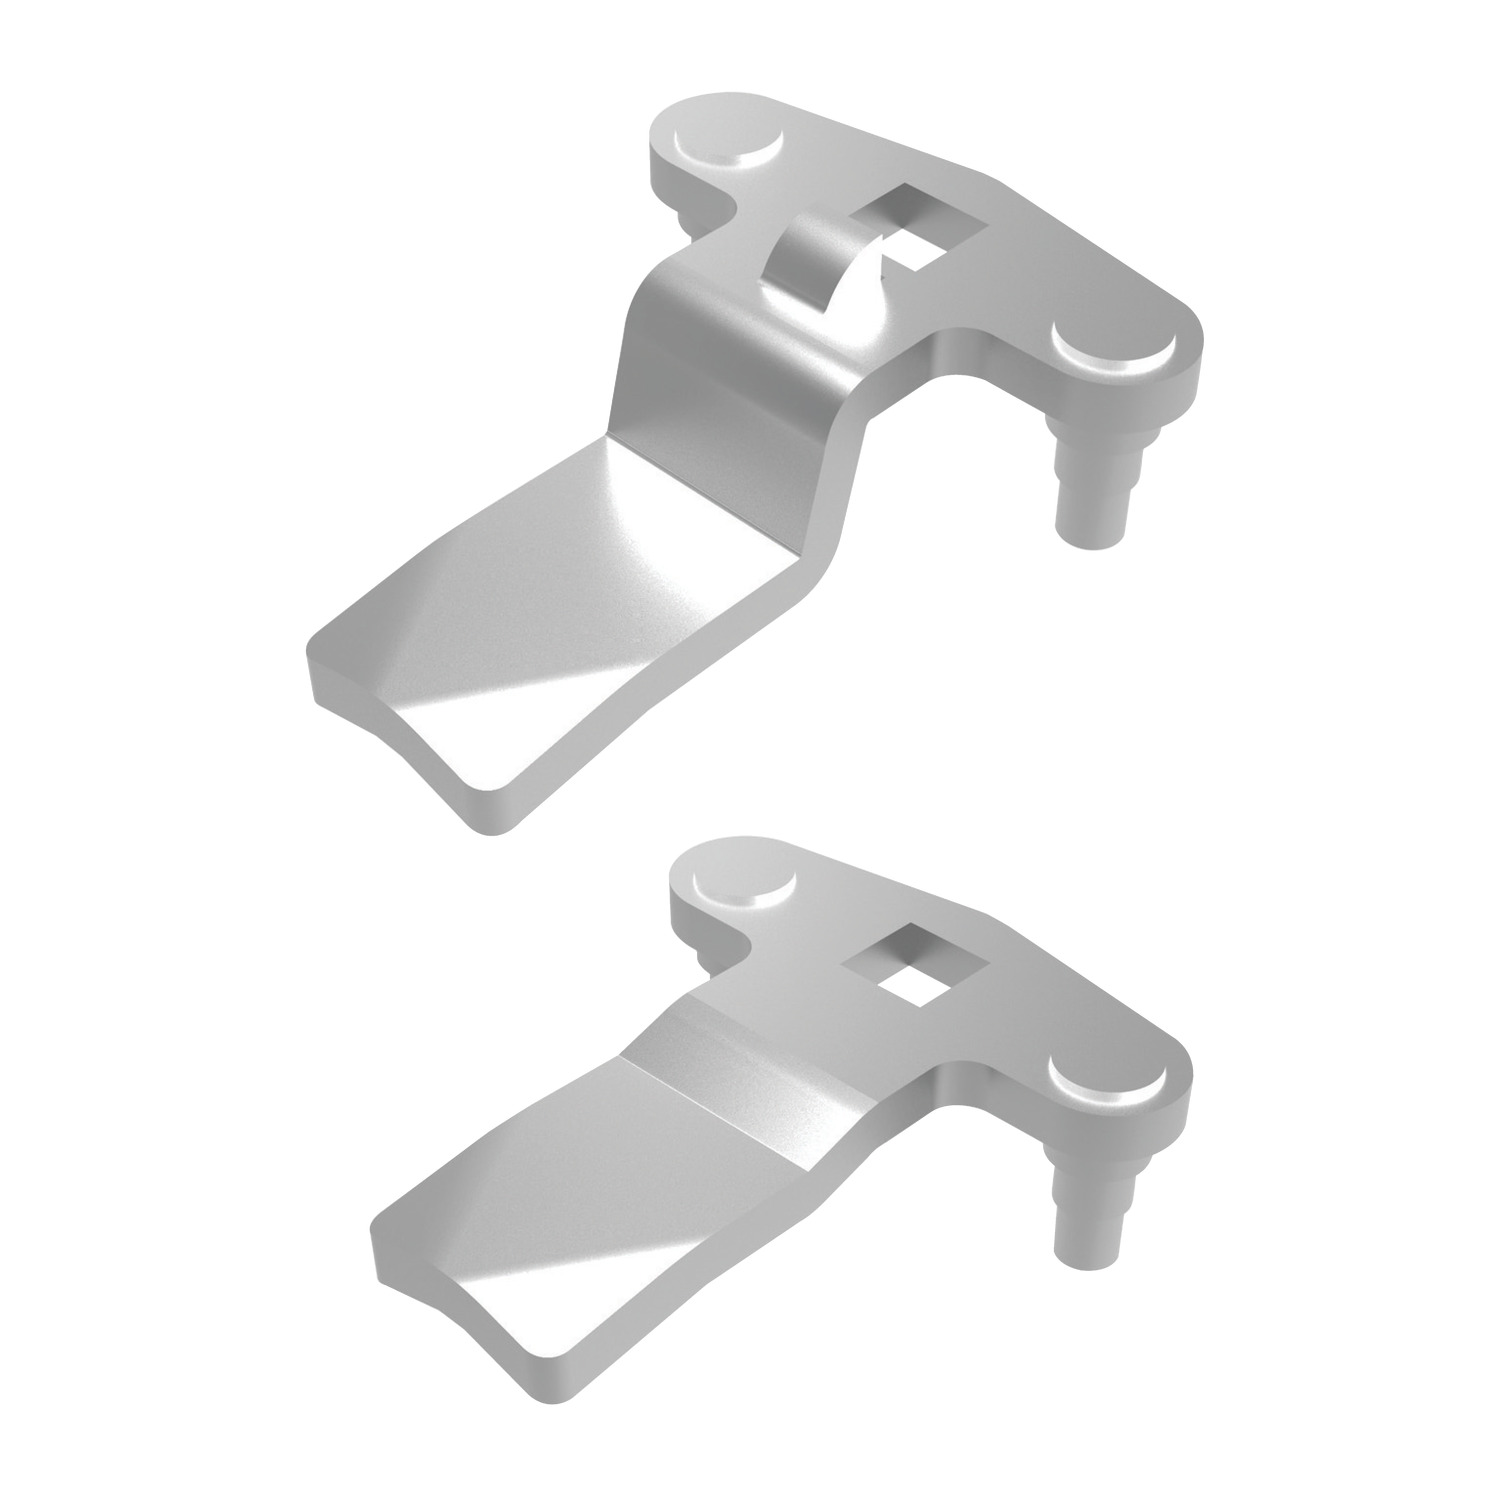 A0240.AW0022 Two Point Cams Flexi for 3-point latching - Steel, zinc plated - With Projection